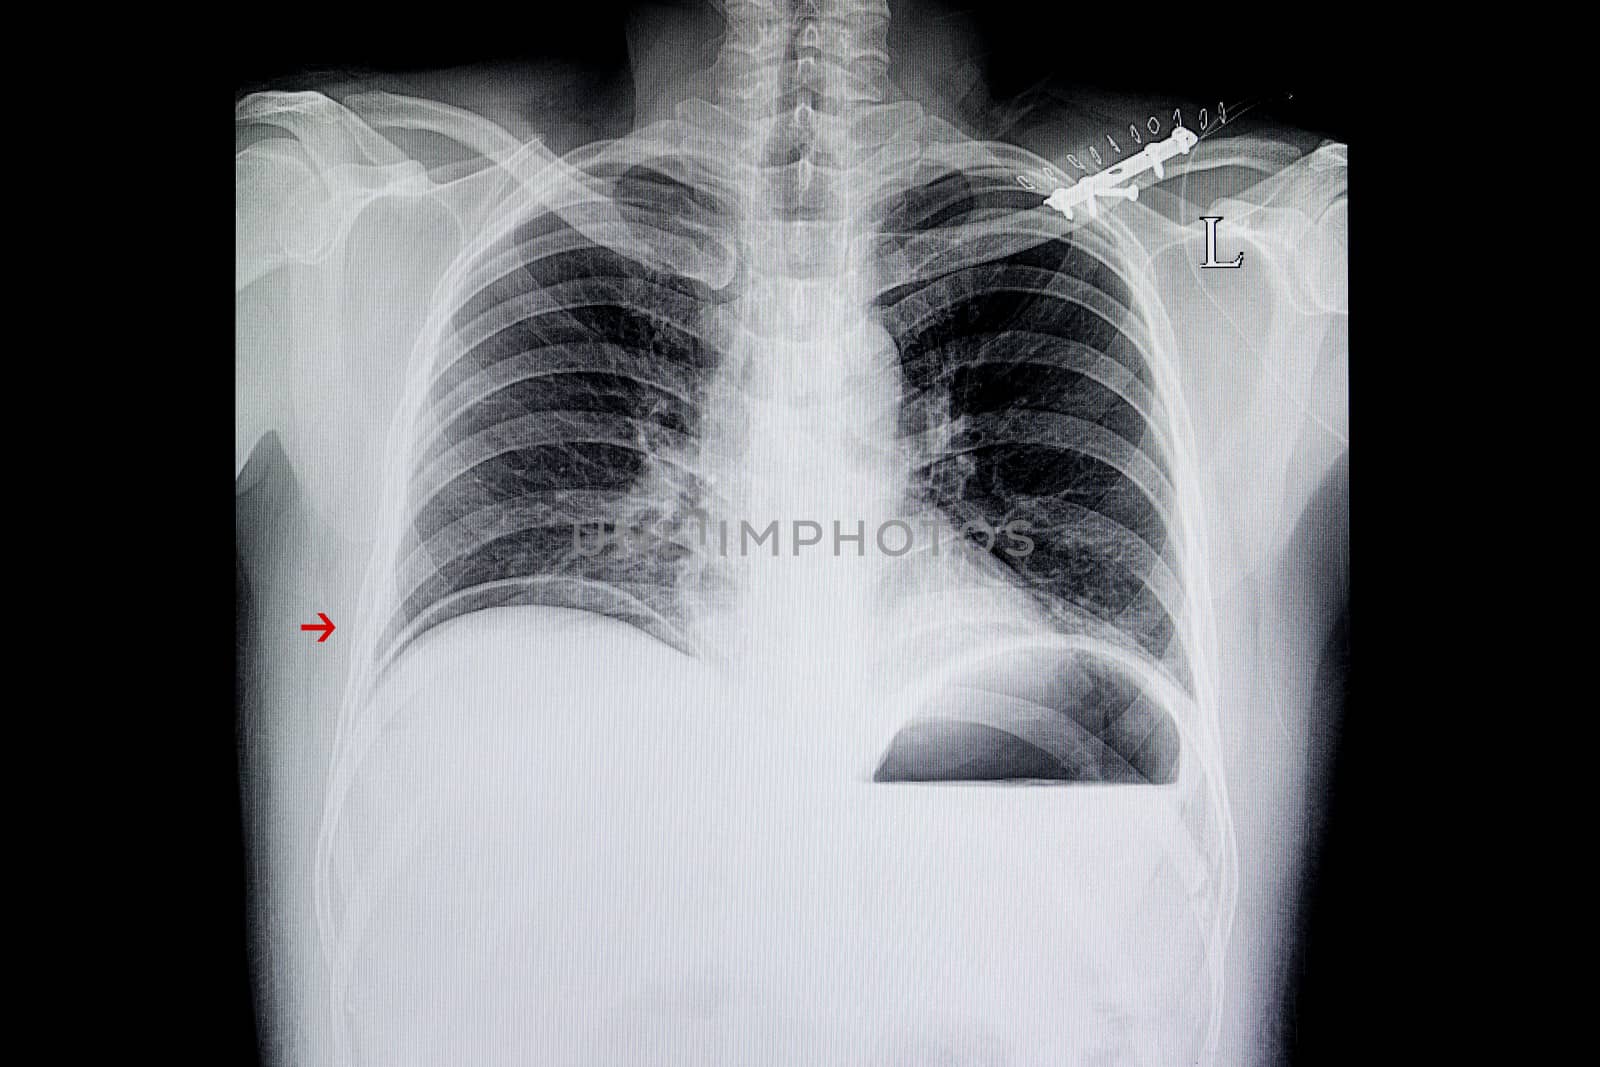 Chest xray film of a posttraumatic patient showing free air under dome of right diaphragm from hollow abdominal organs rupture.